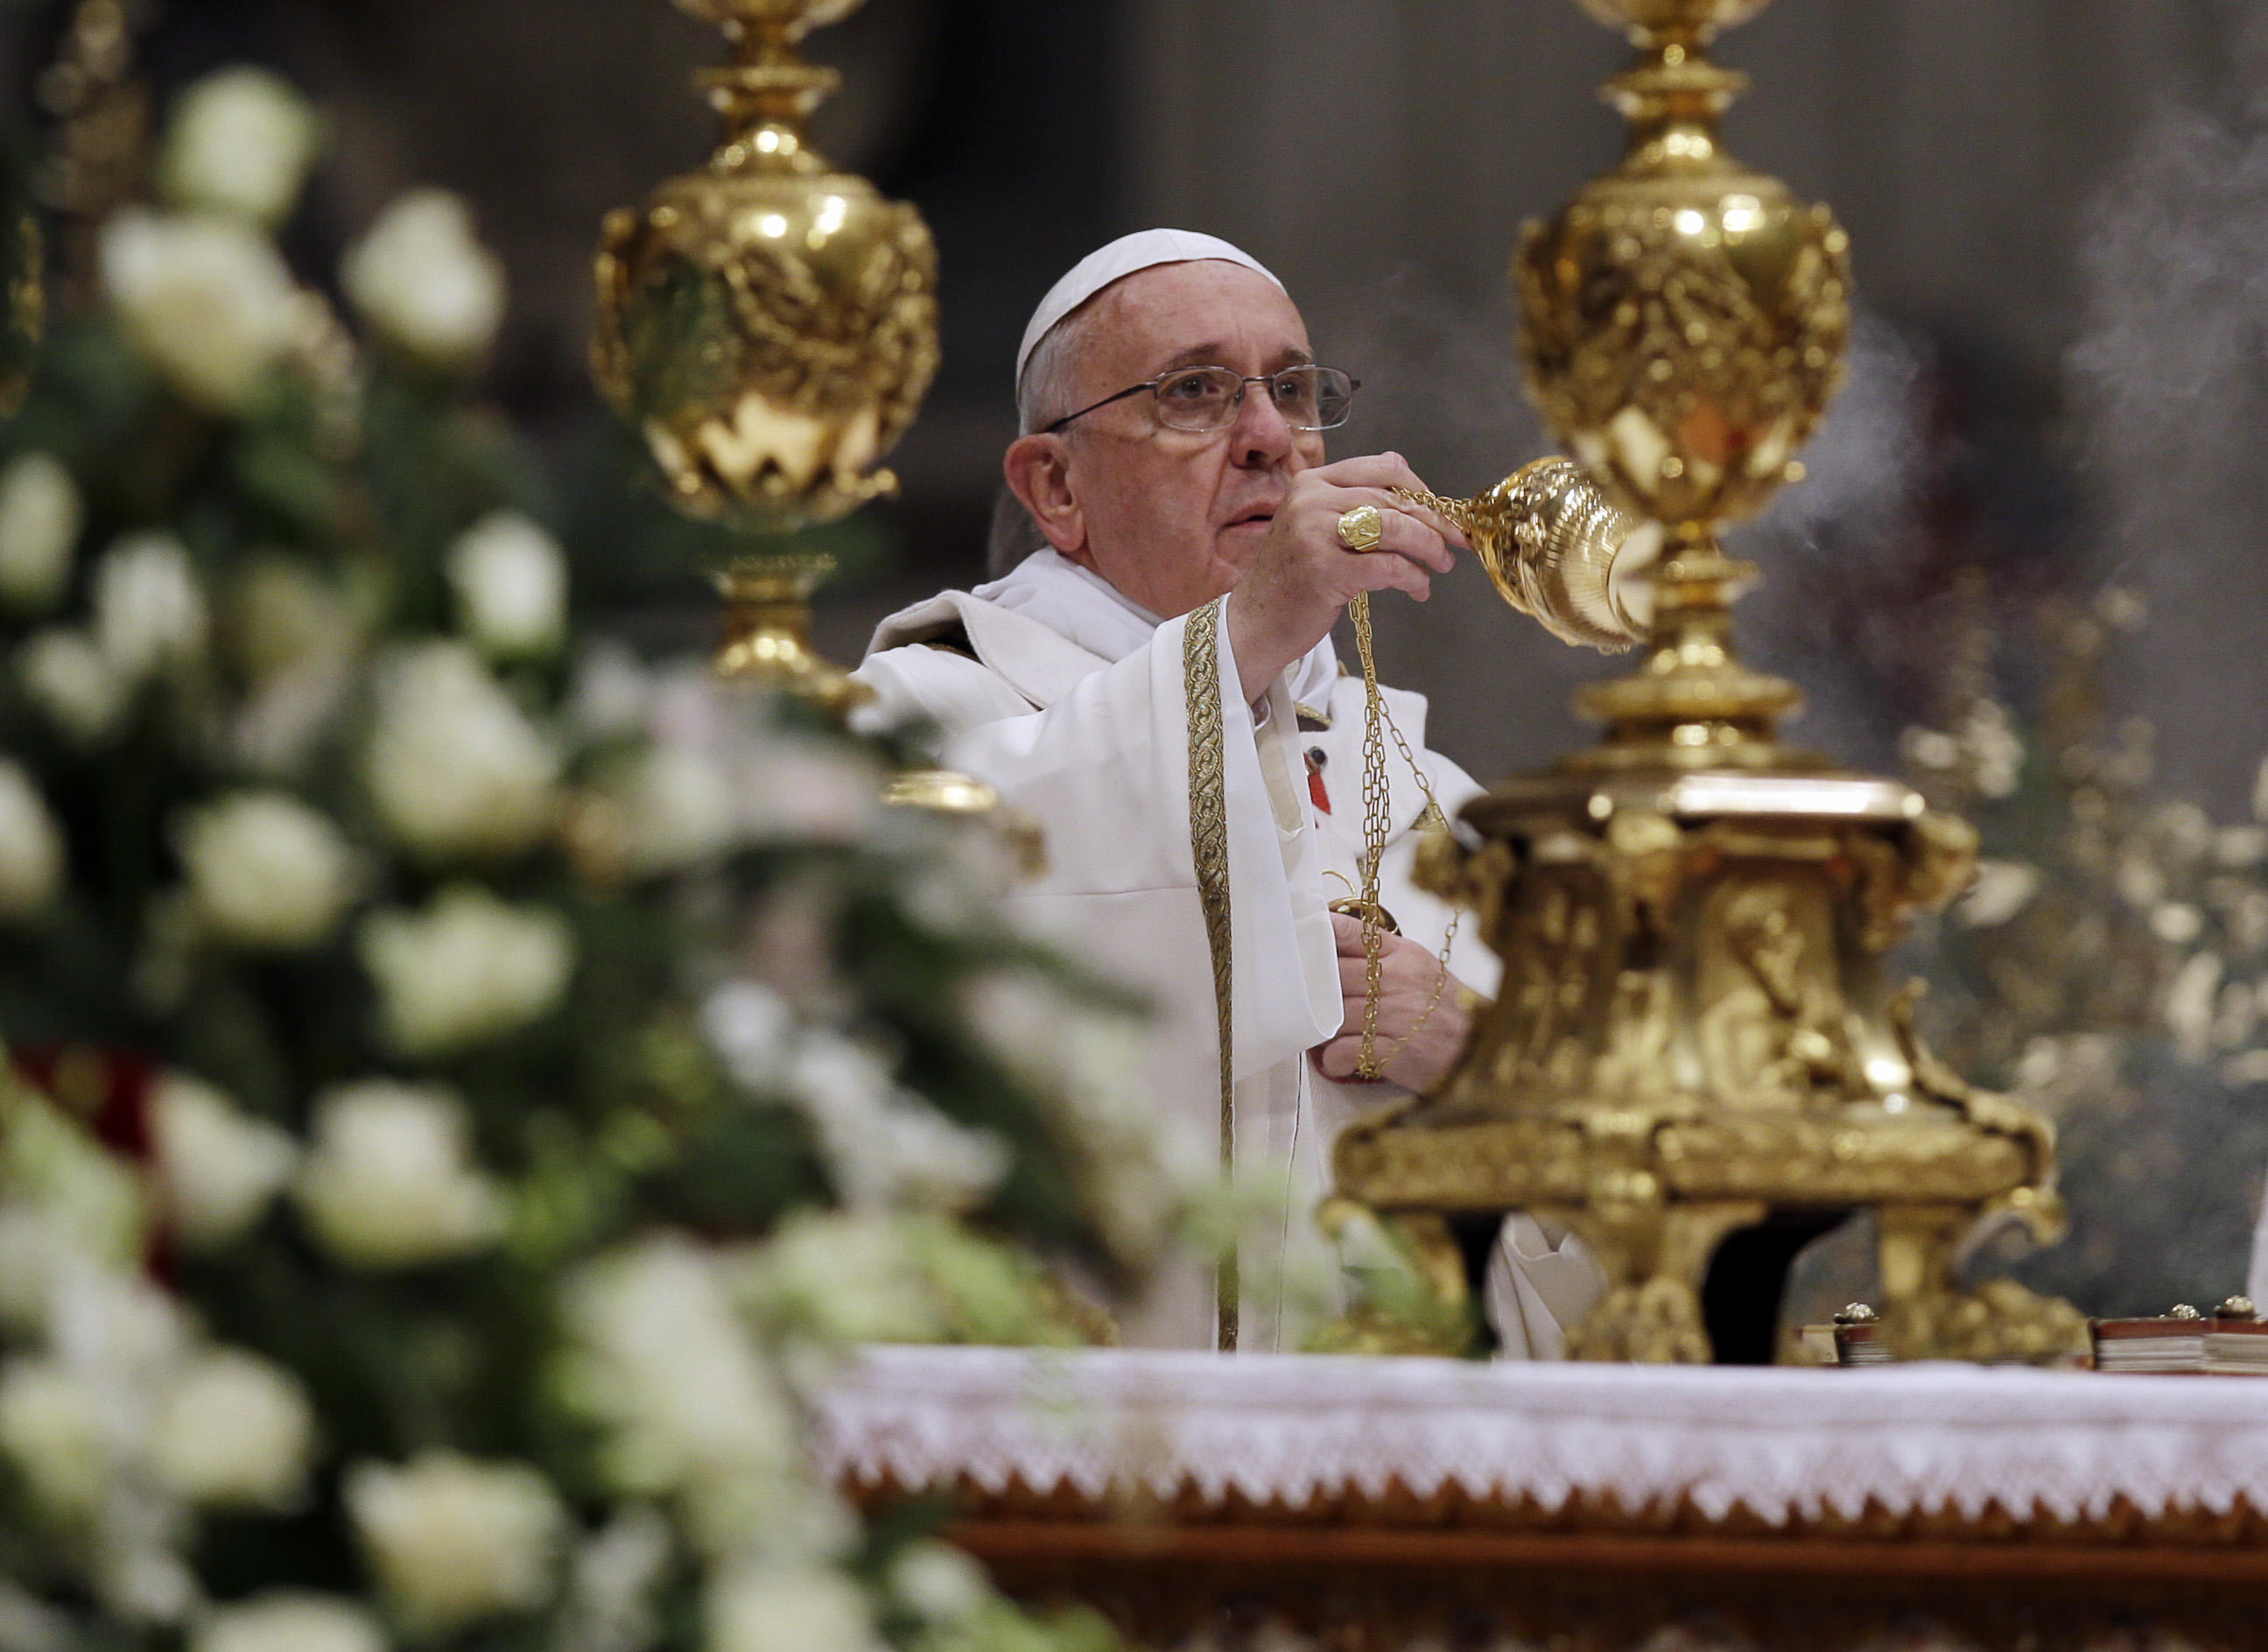 Pope Francis celebrates Christmas Eve Mass in packed St. Peter's